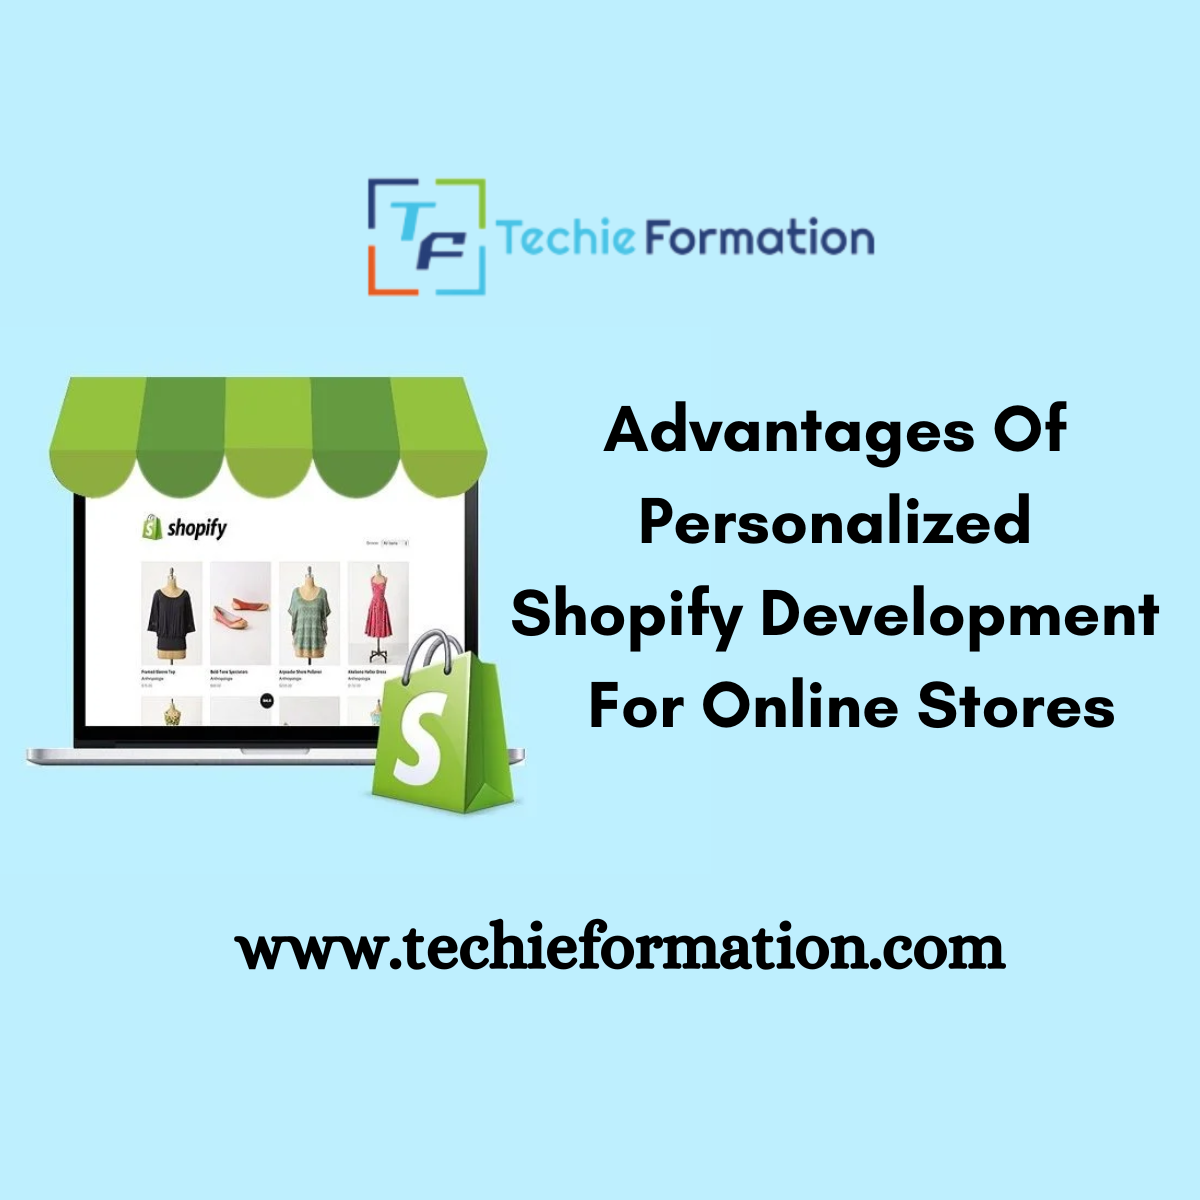 Advantages Of Personalized Shopify Development For Online Stores